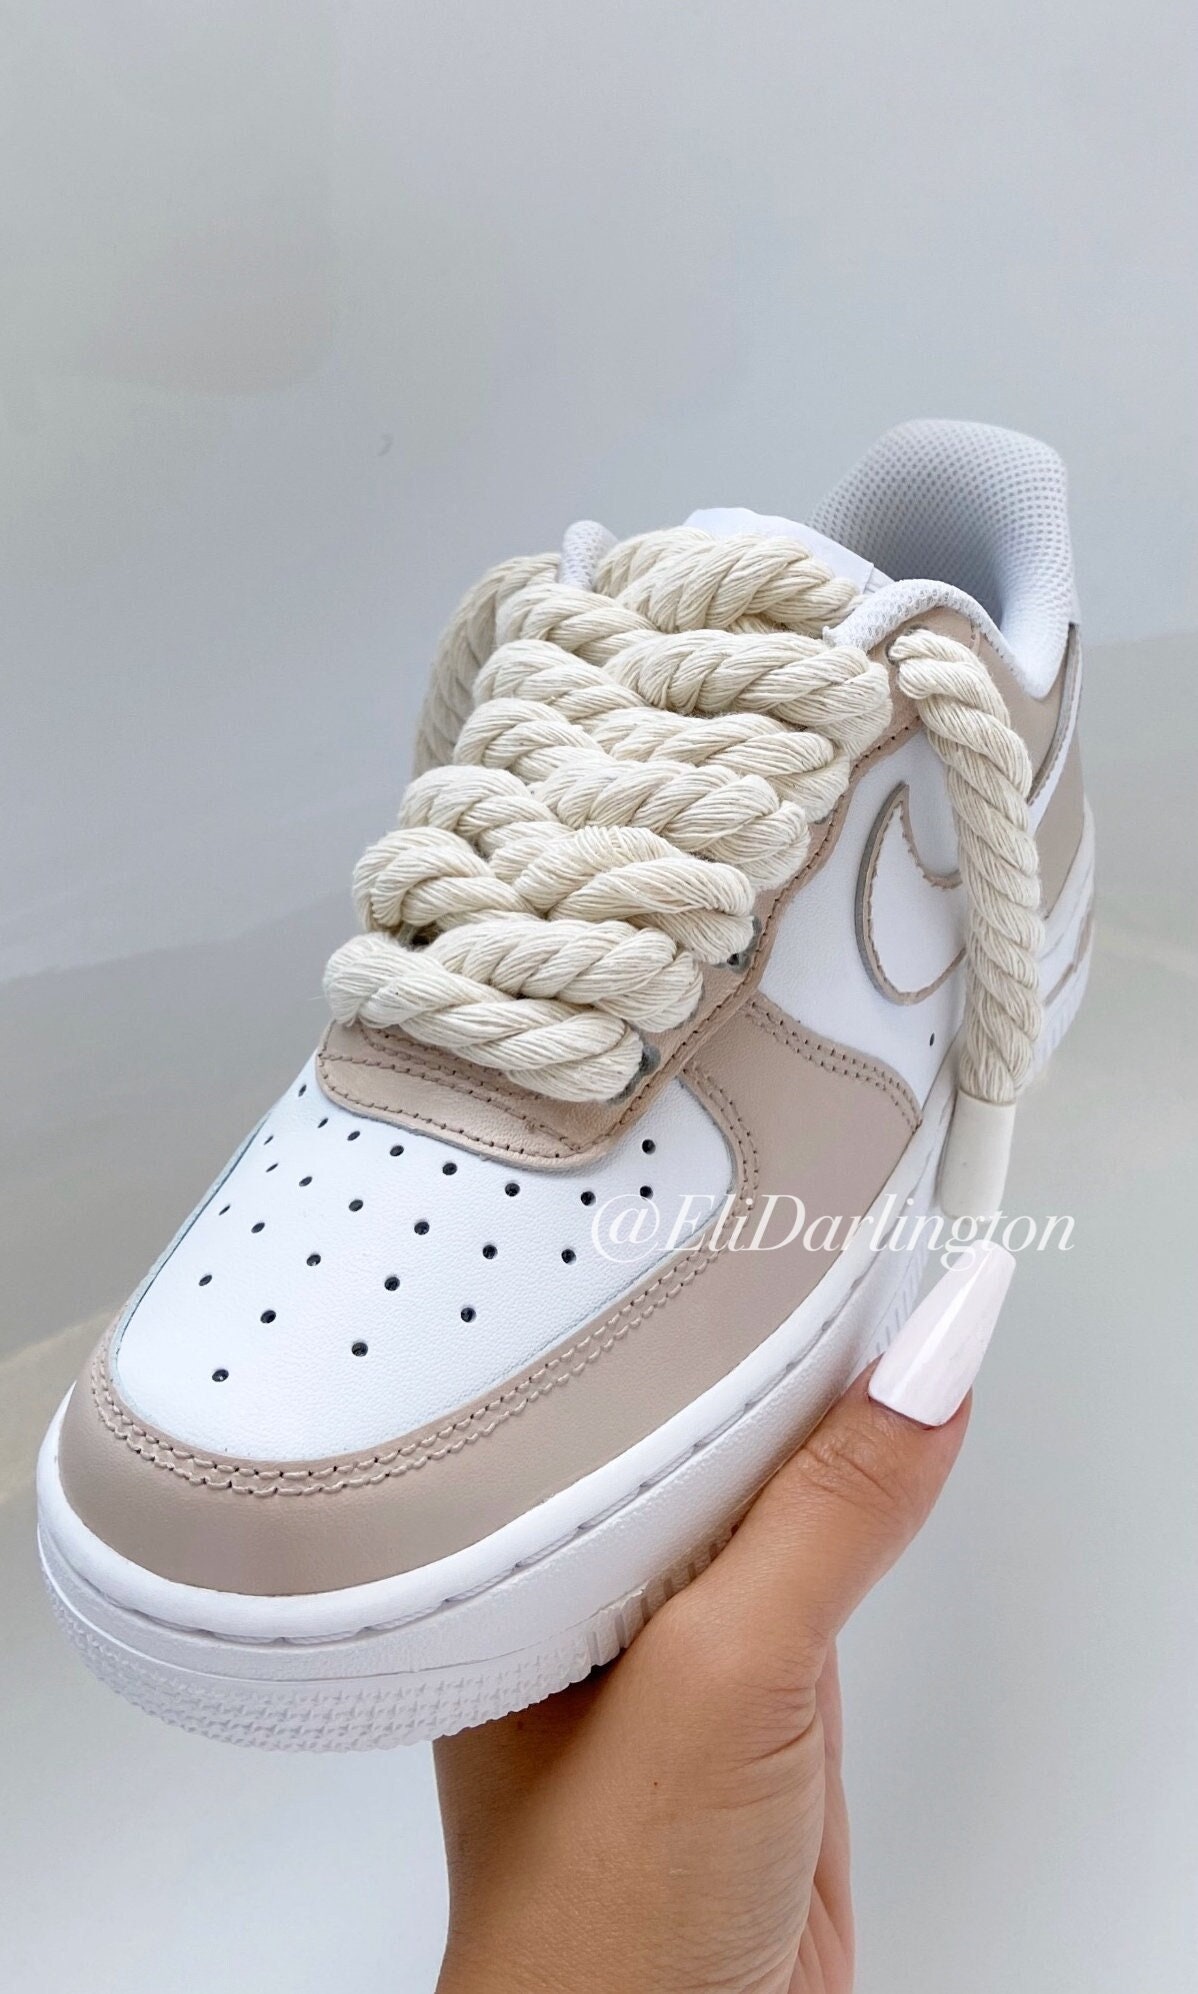 Custom Hand Painted Nike Air Force Sneakers With Rope - Etsy Norway